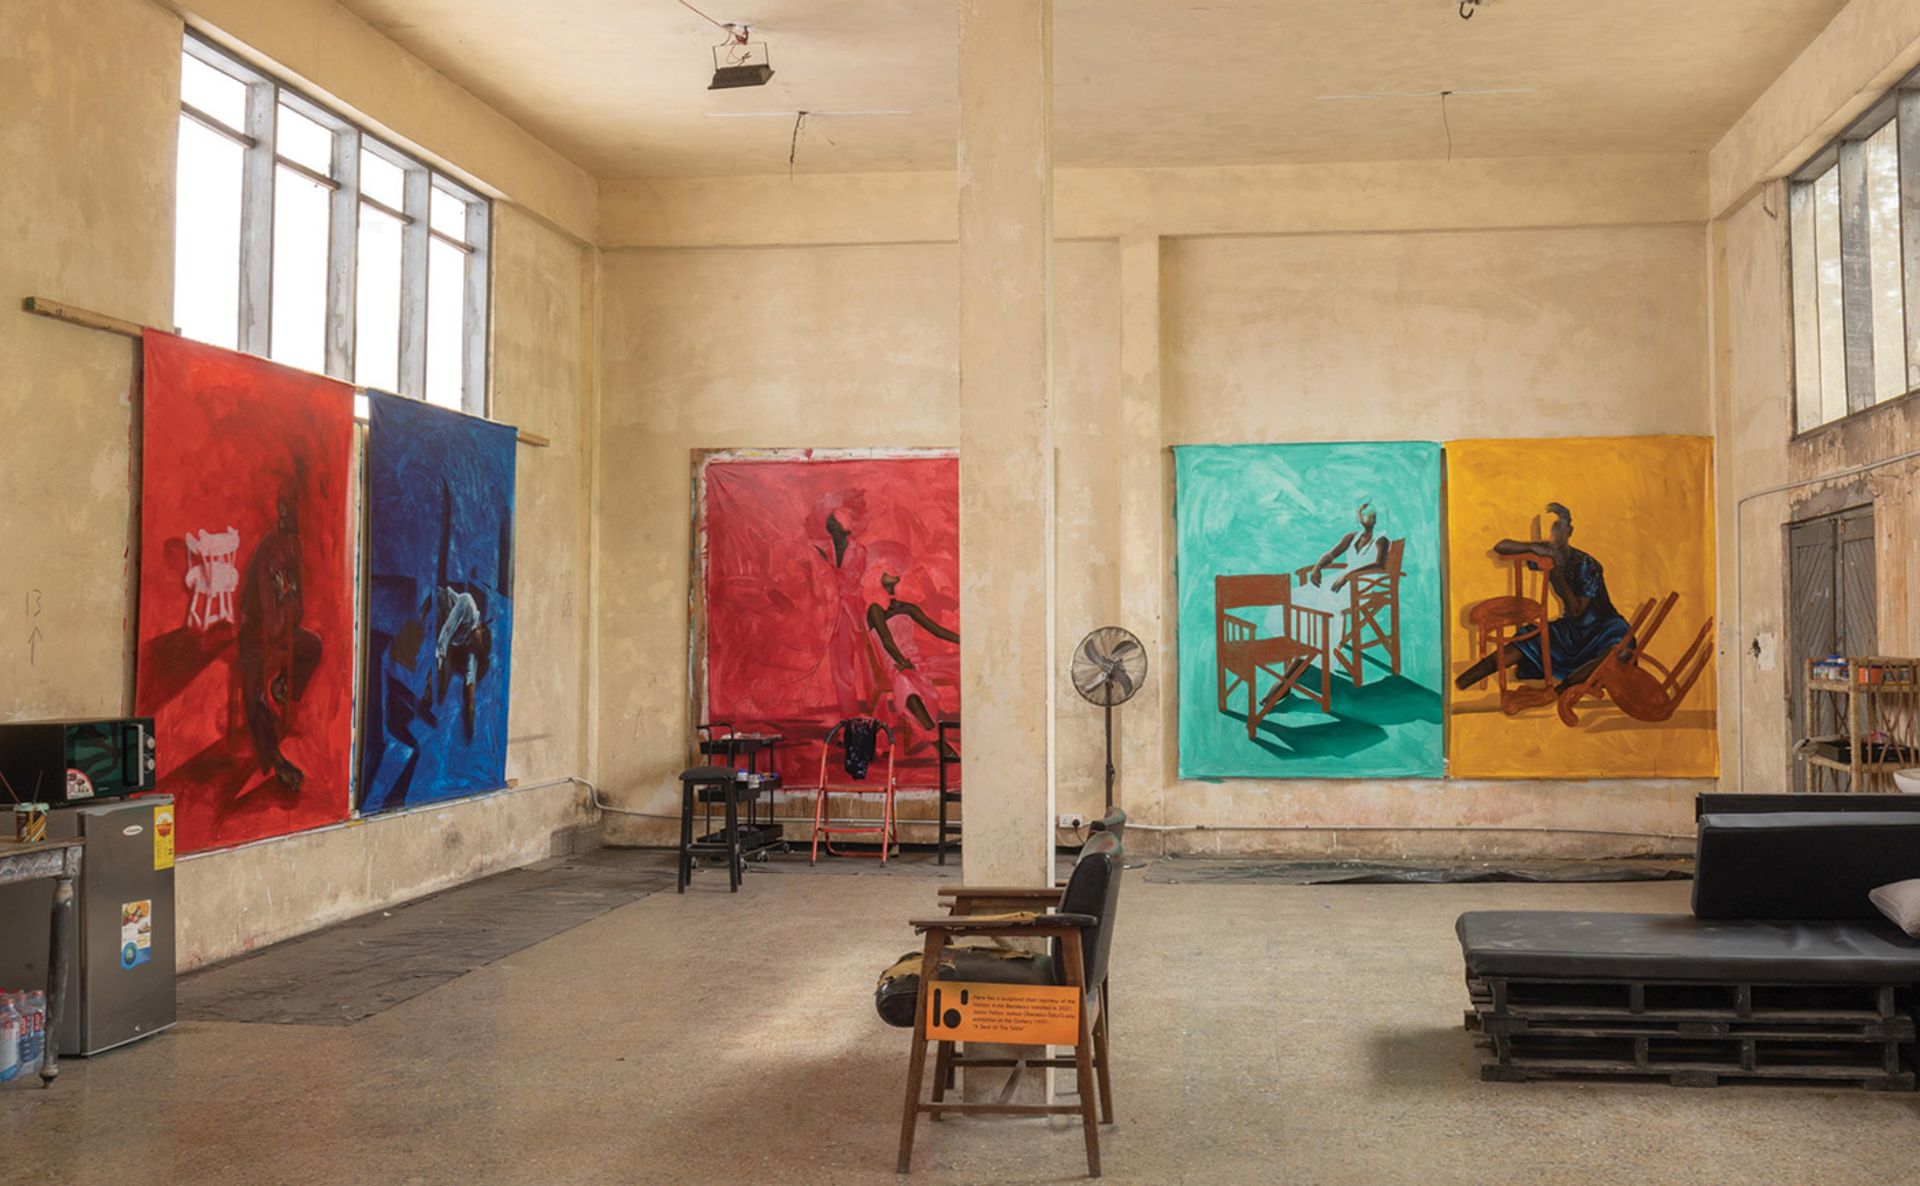 The Institute Museum of Ghana will combine working studios and exhibition spaces in a repurposed factory complex Photo: © Kwadwo Asiedu Obeng; courtesy of the Institute Museum of Ghana